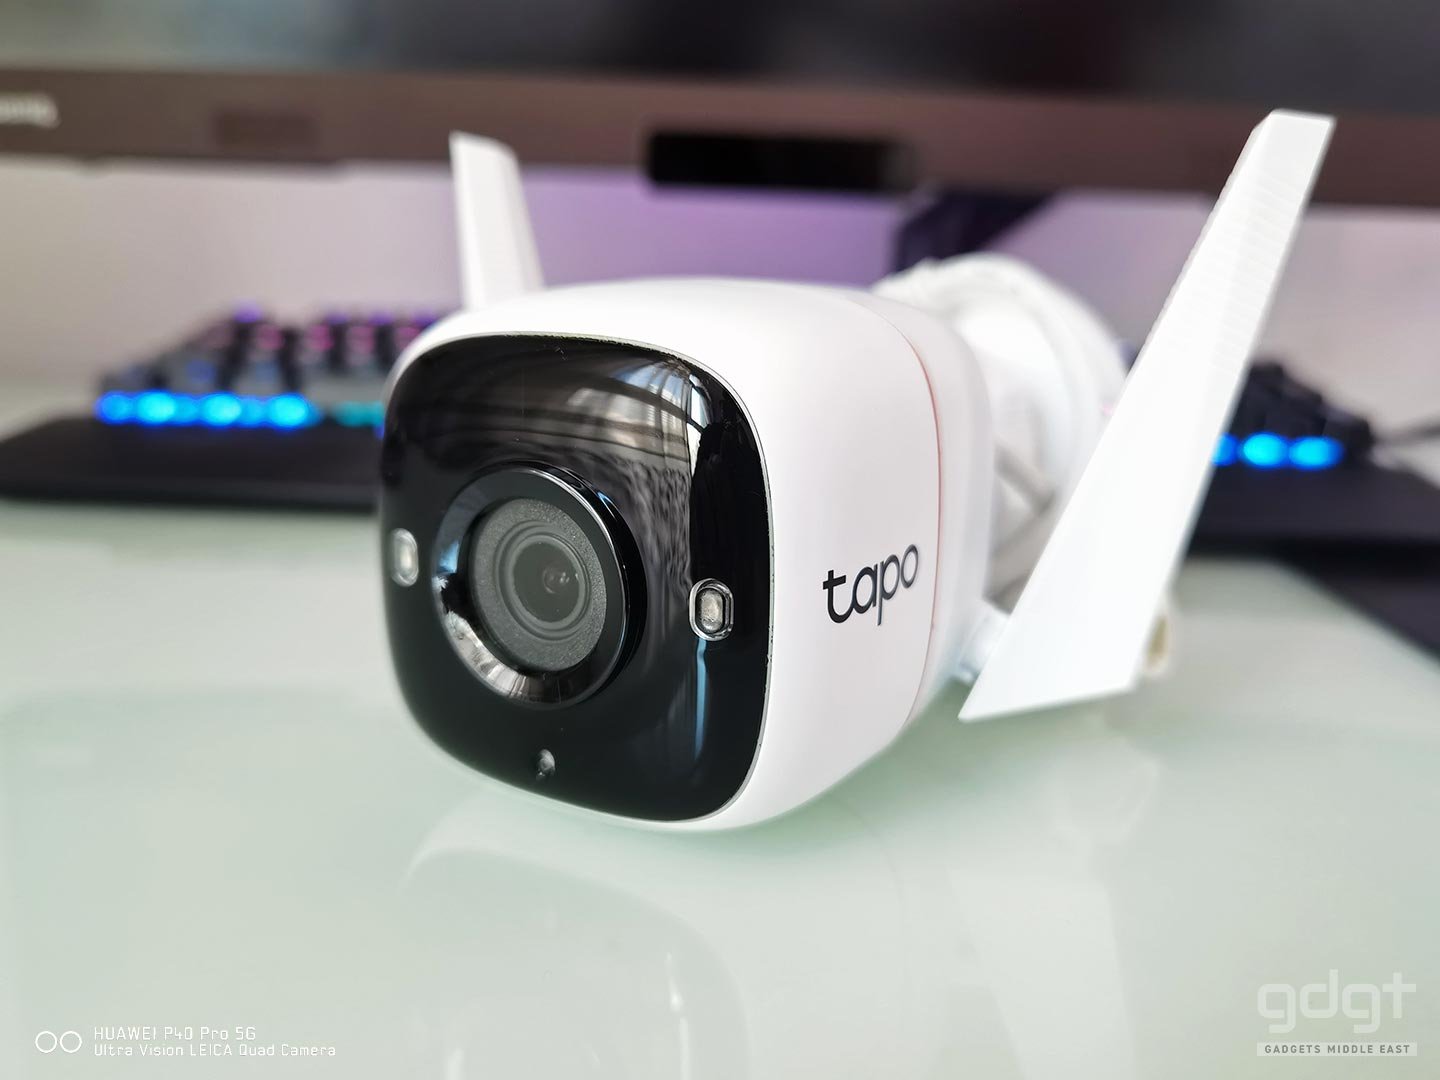 Tapo Outdoor Security Camera Unboxing and Setup Video: Tapo C310 